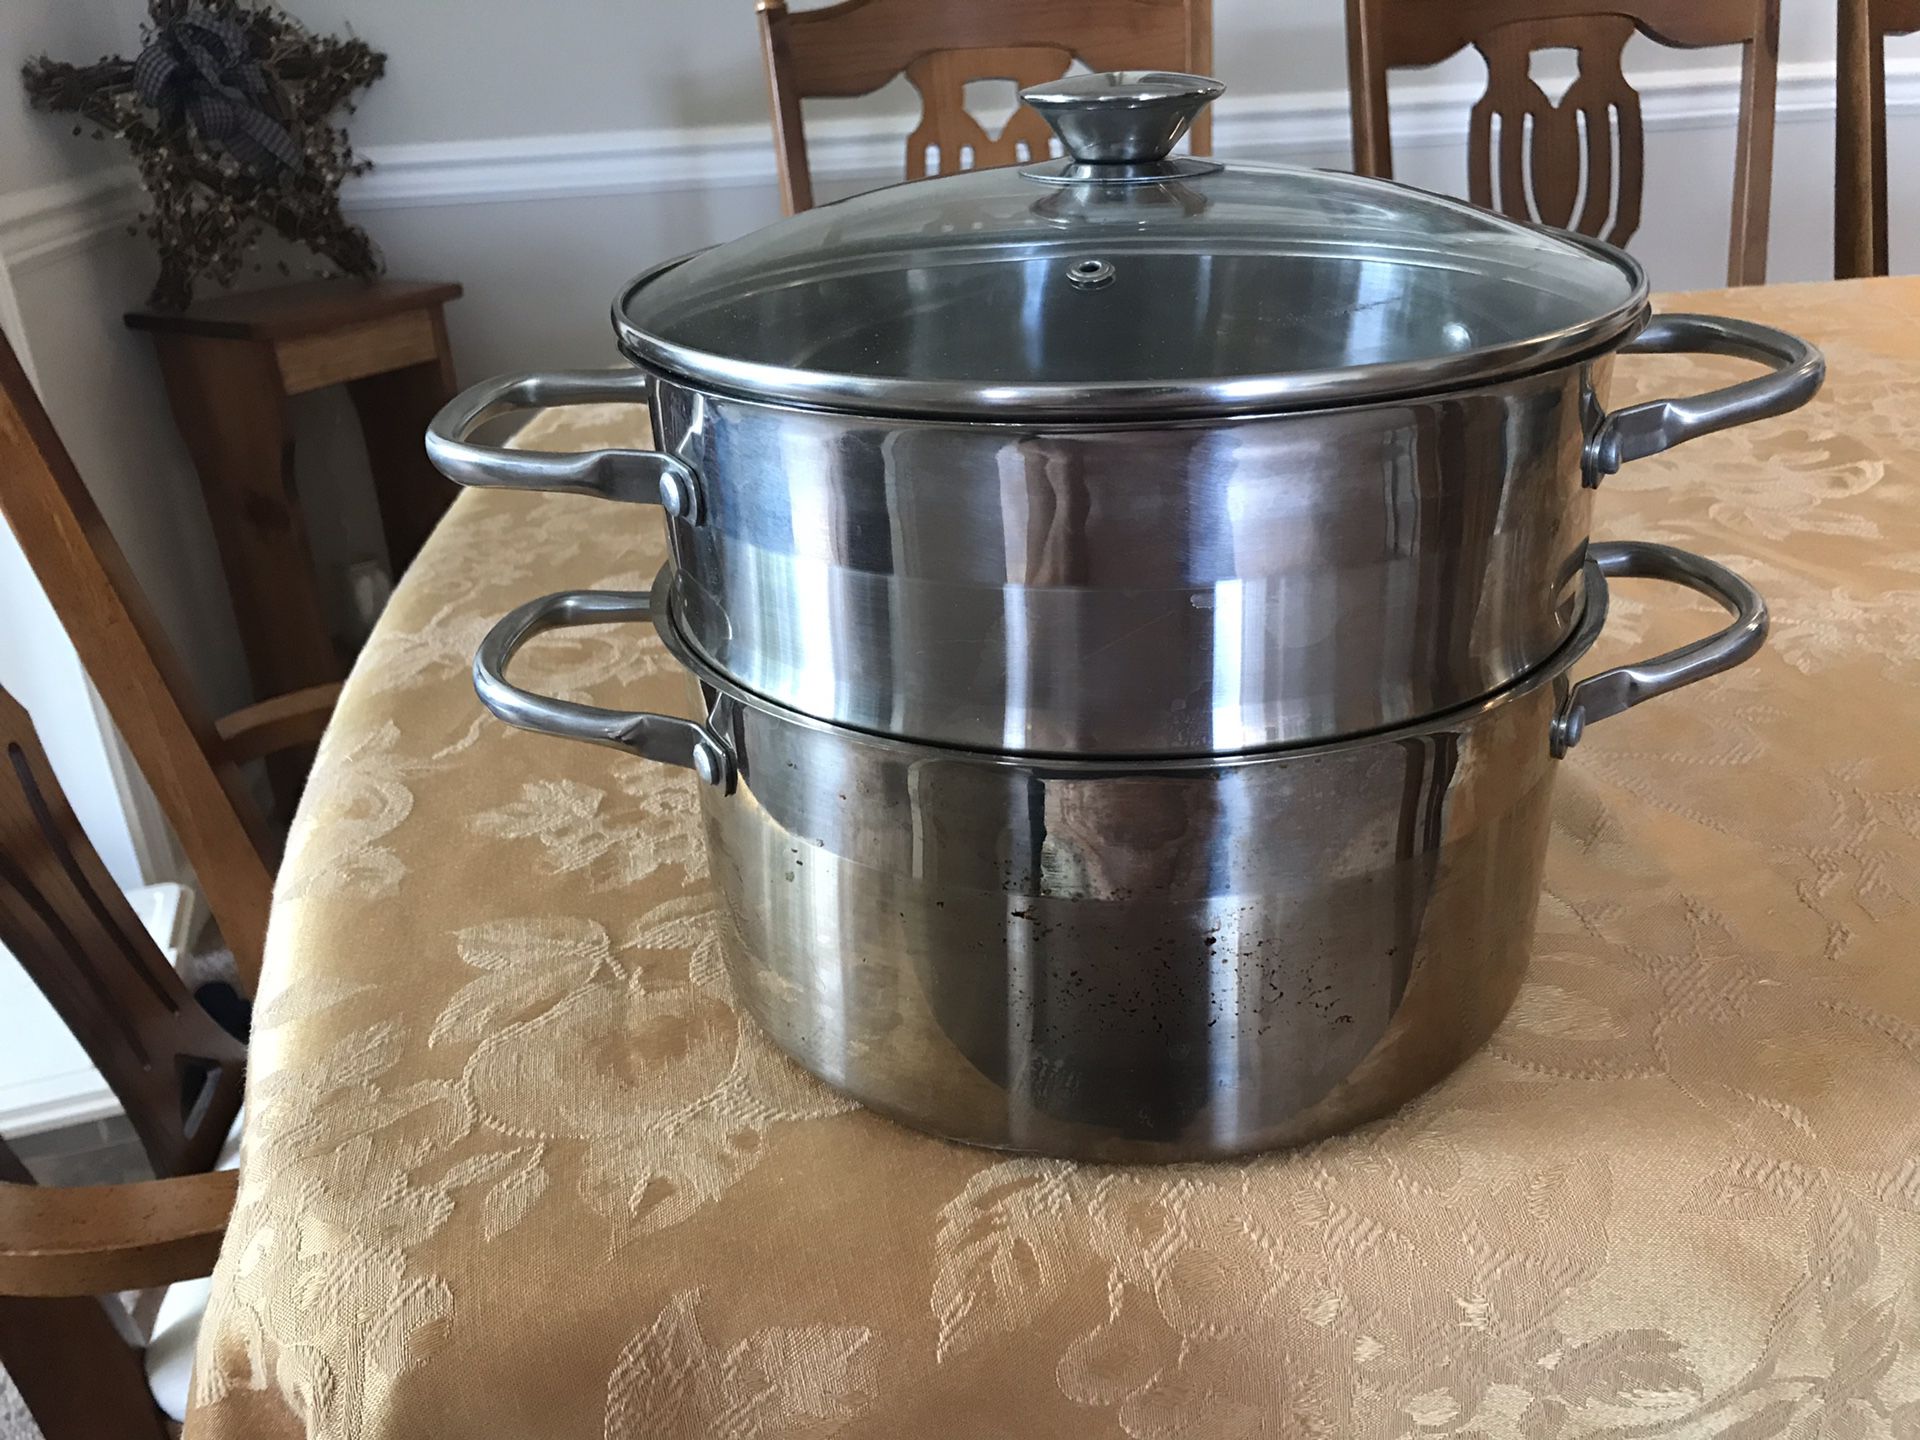 5qt Oggi stock pot with steamer and glass lid